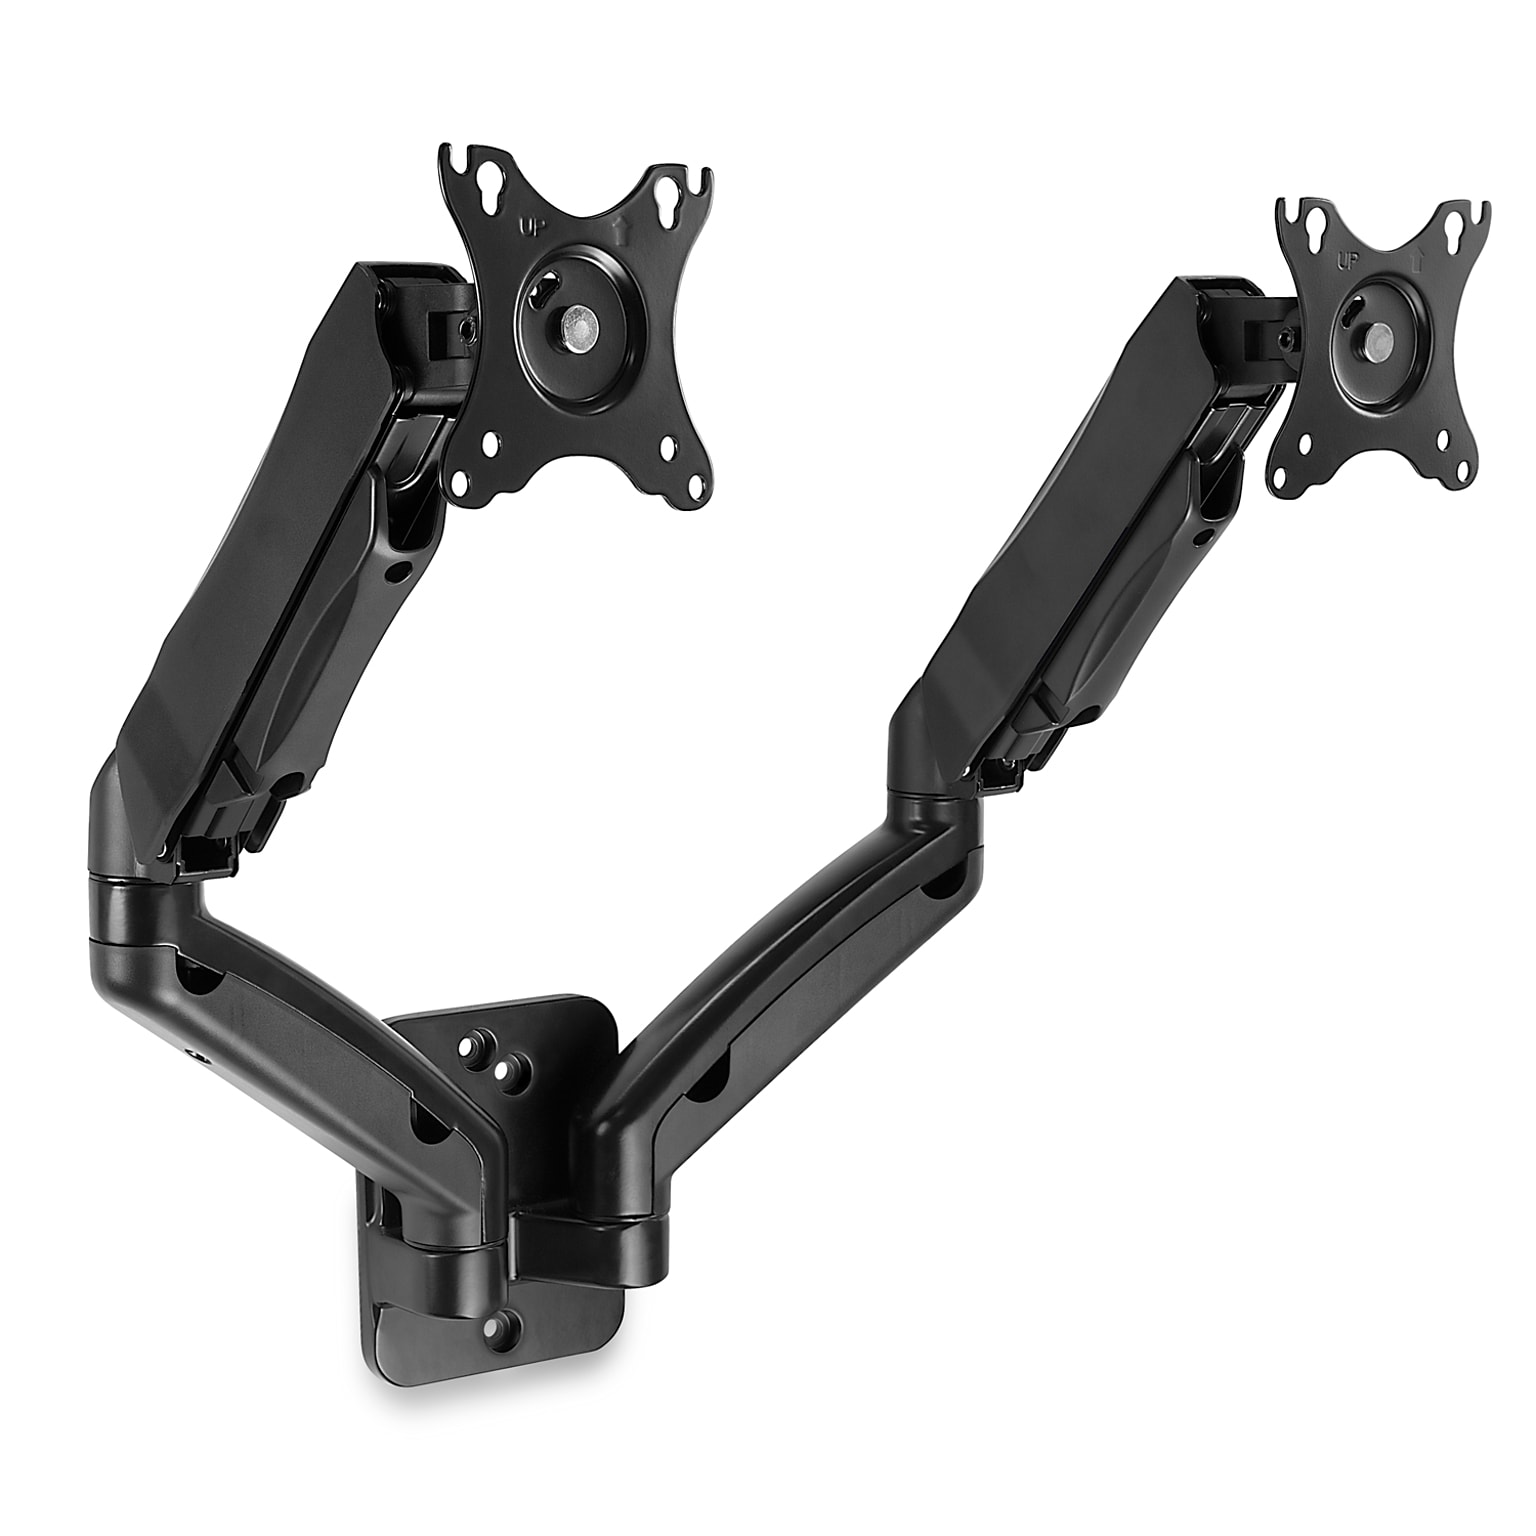 Mount-It! Dual Arm Monitor Wall Mount for 19 to 27 Displays, Black (MI-766)